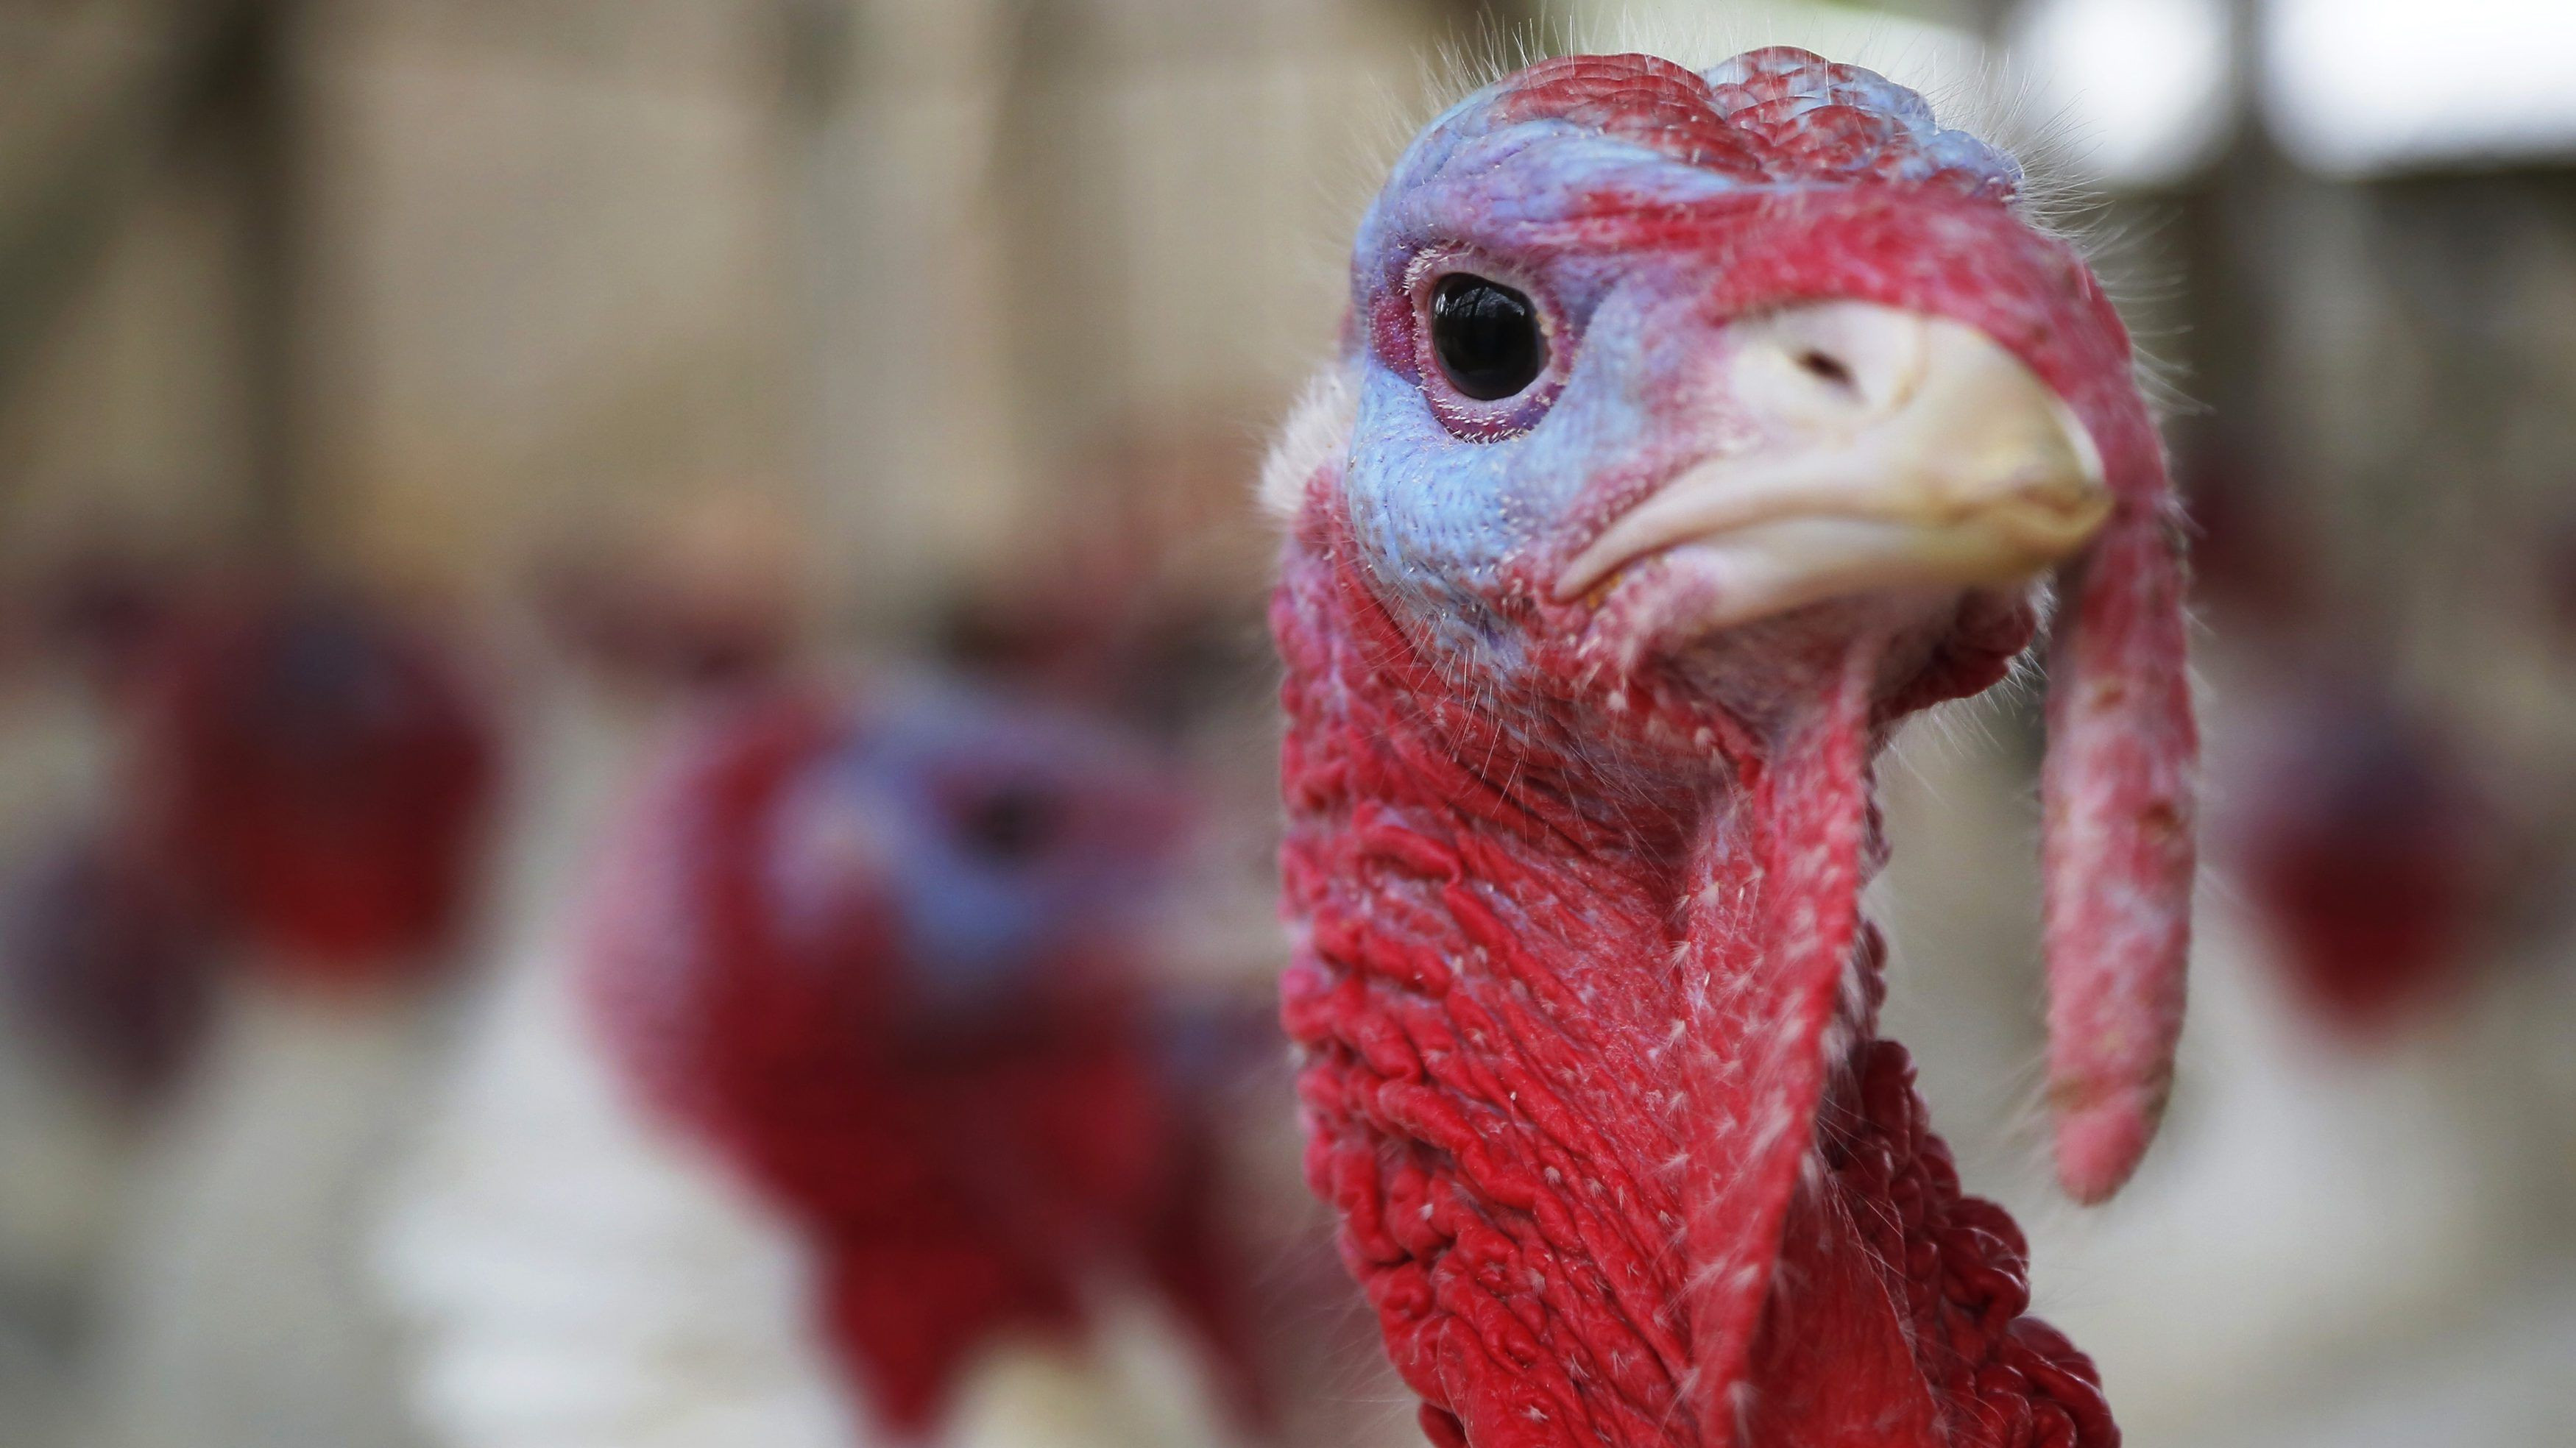 Thanksgiving Video Full Of Turkey
 Amazon s Whole Foods turkey promotion is ruining the